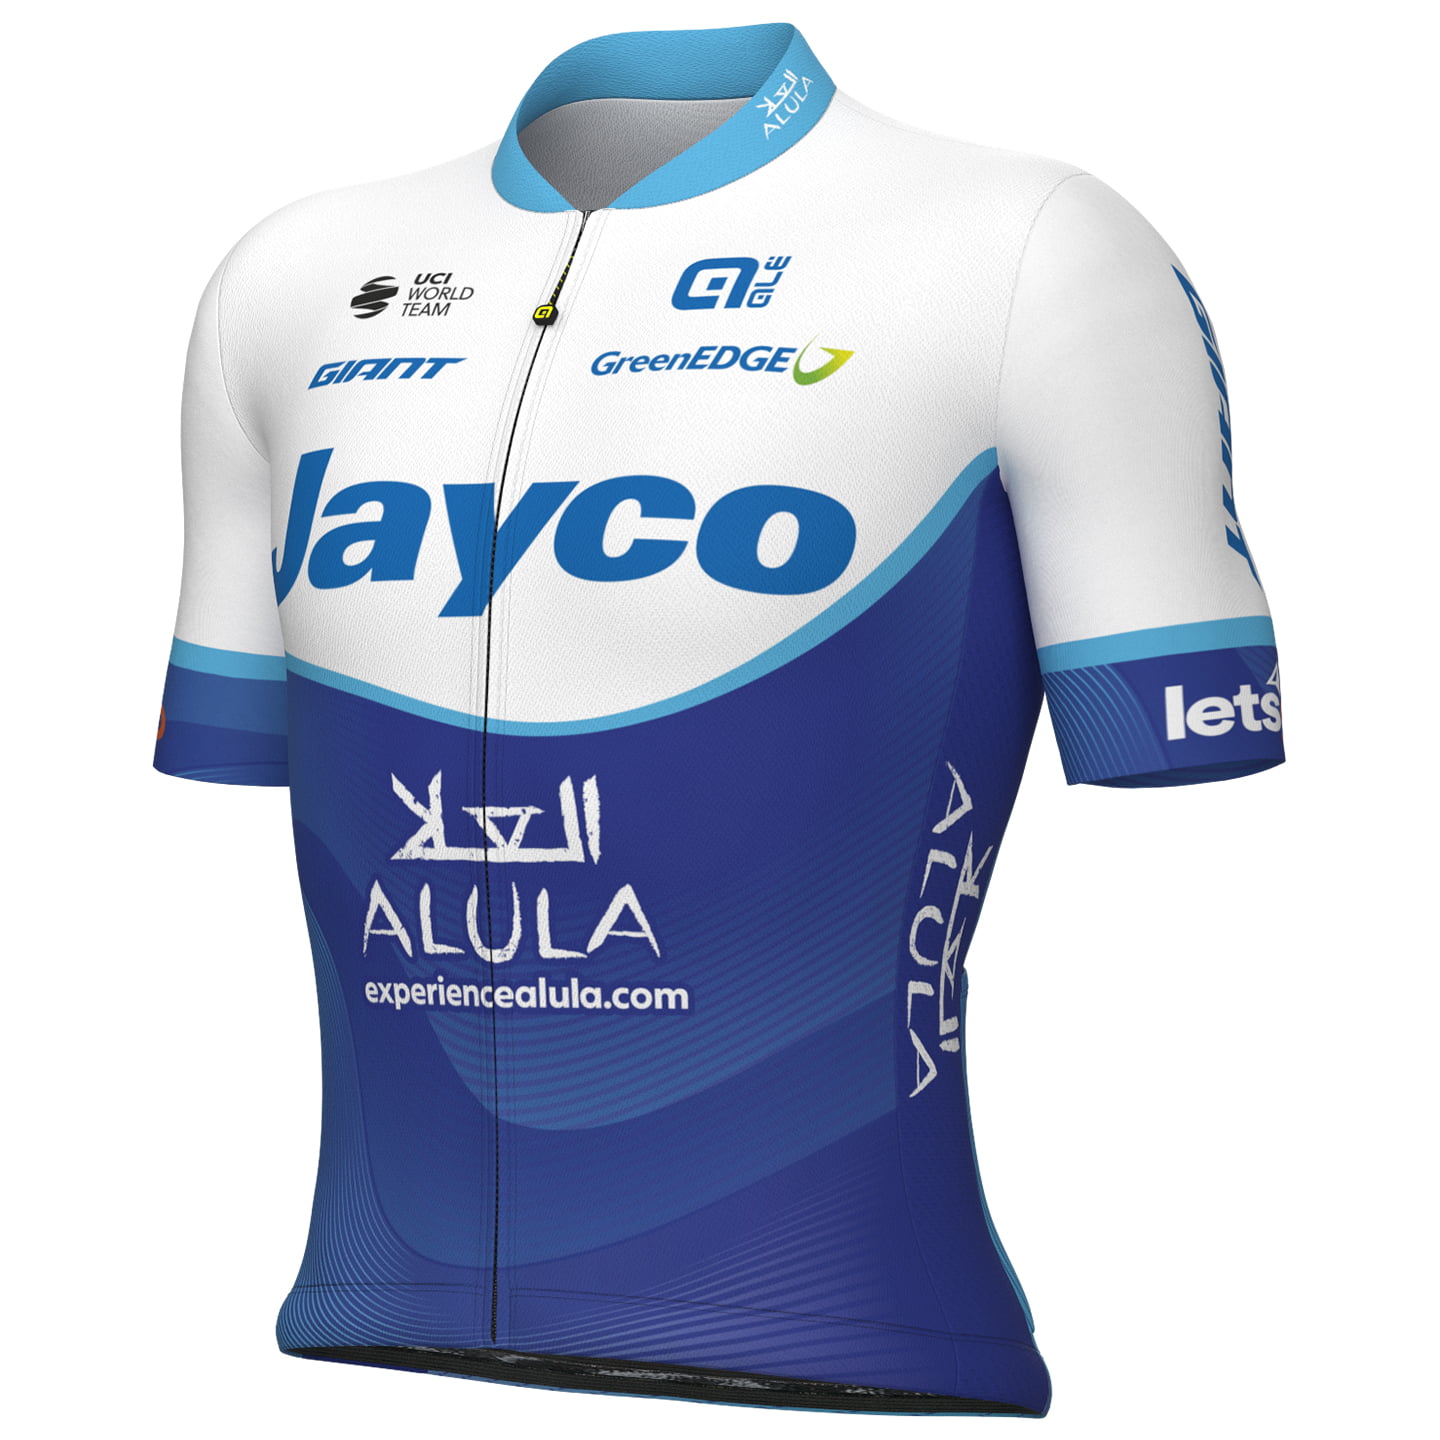 TEAM JAYCO-ALULA 2023 Short Sleeve Jersey, for men, size L, Cycling shirt, Cycle clothing